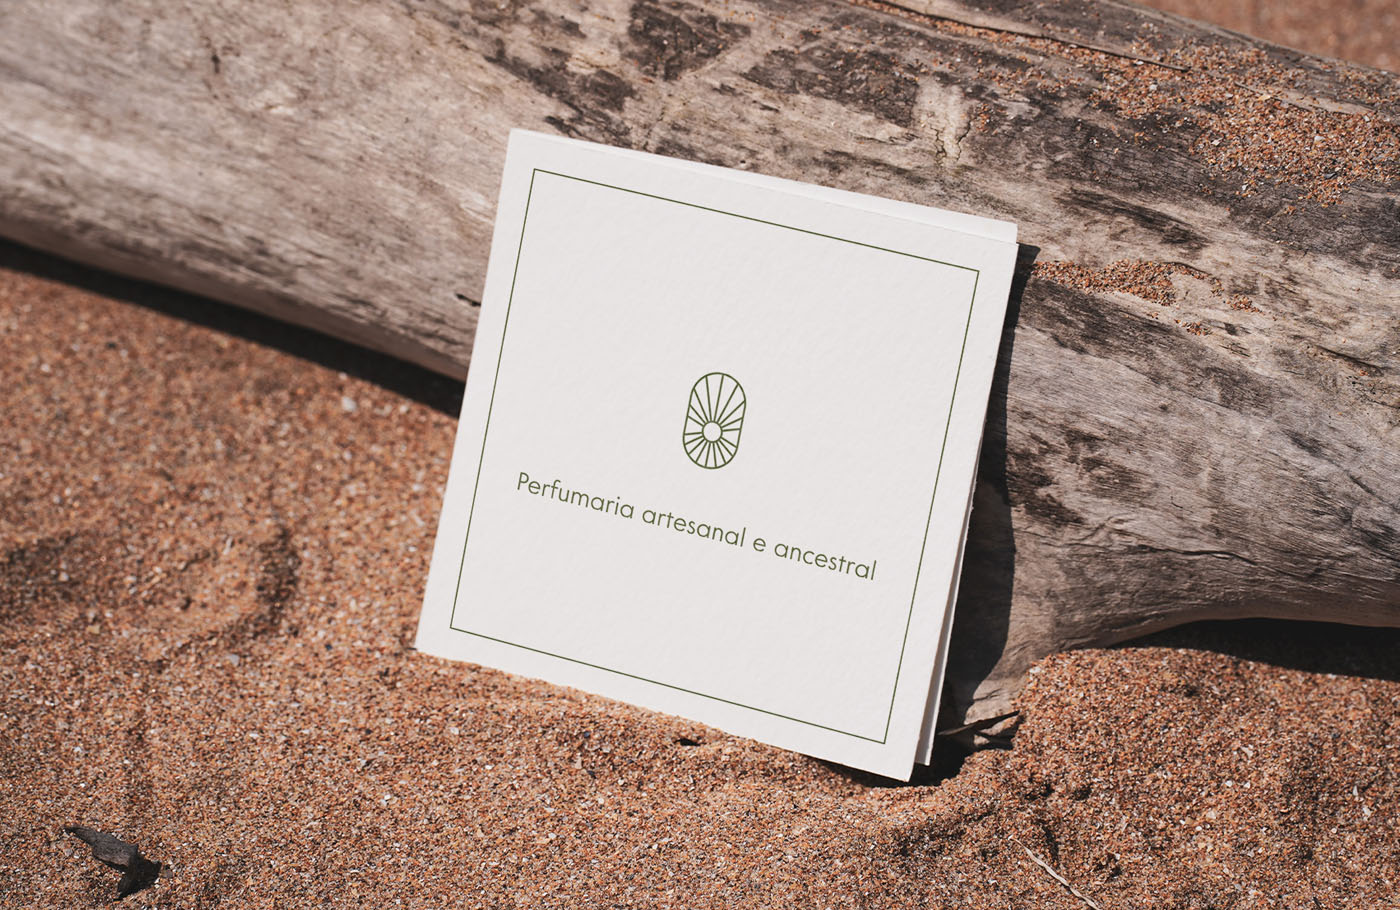 Sertaneja Botany: Design and Branding for a Fragrant Journey to Self-Discovery and Natural Essence